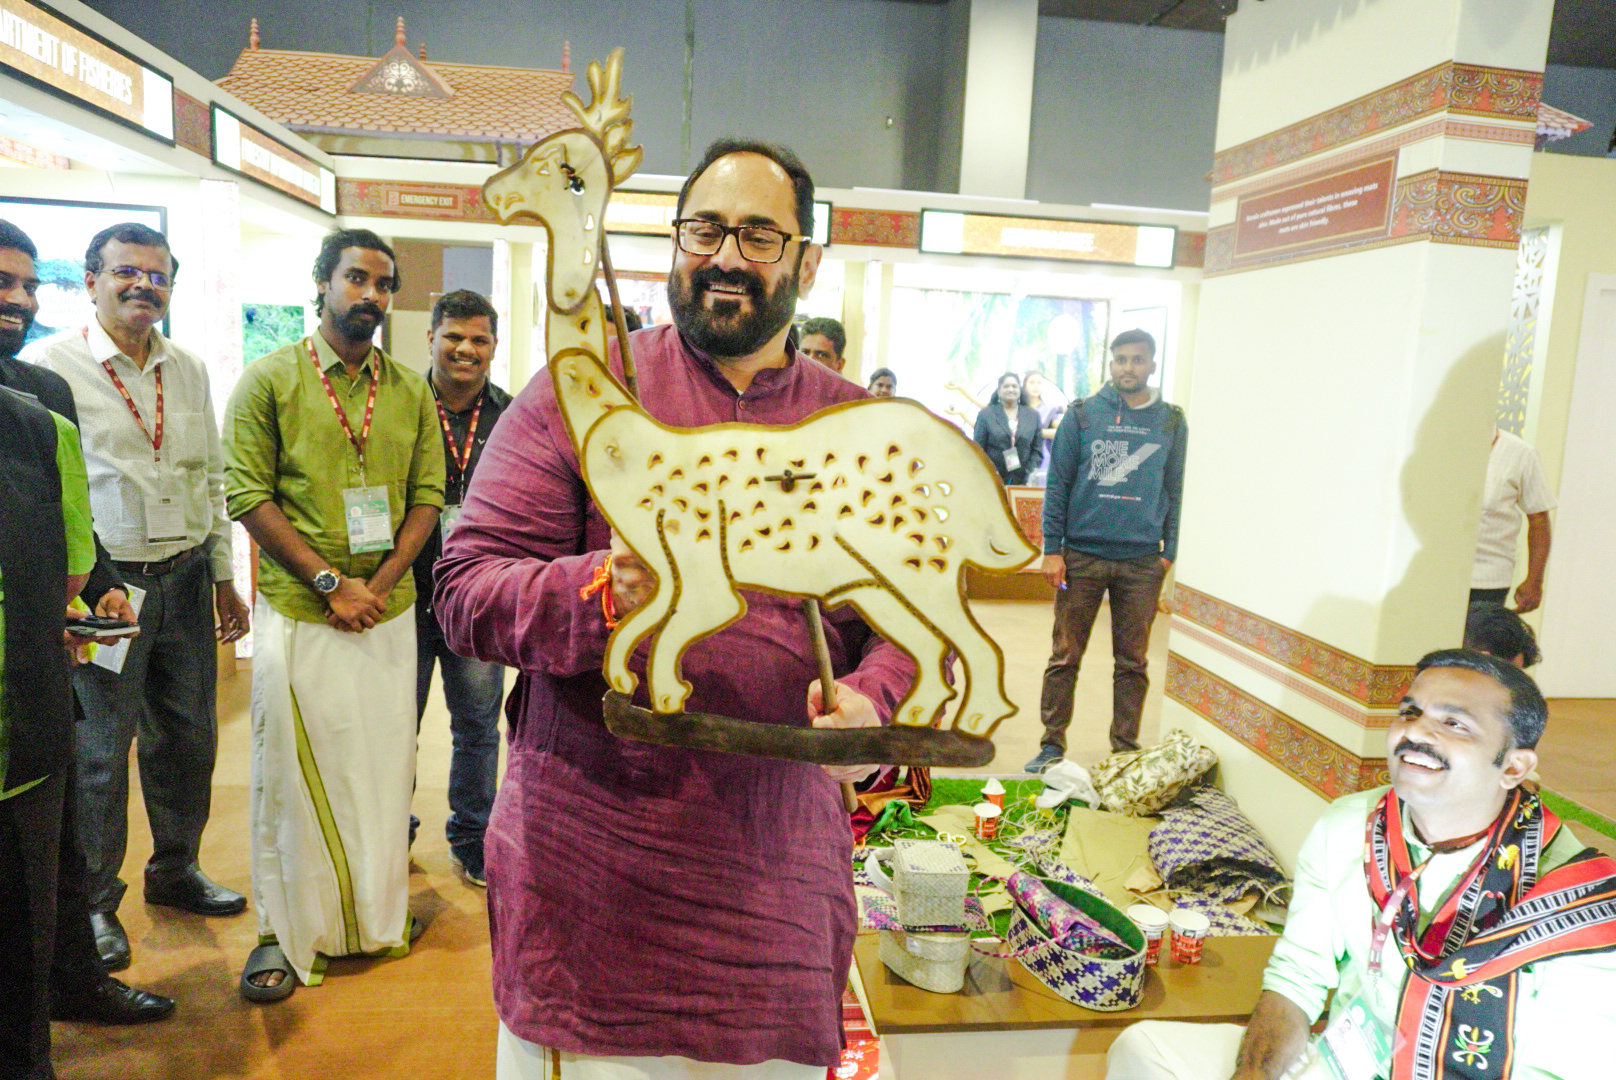 IITF-2022: Kerala pavilion resembles the tradition of God’s Own Country, says Rajeev Chandrasekhar